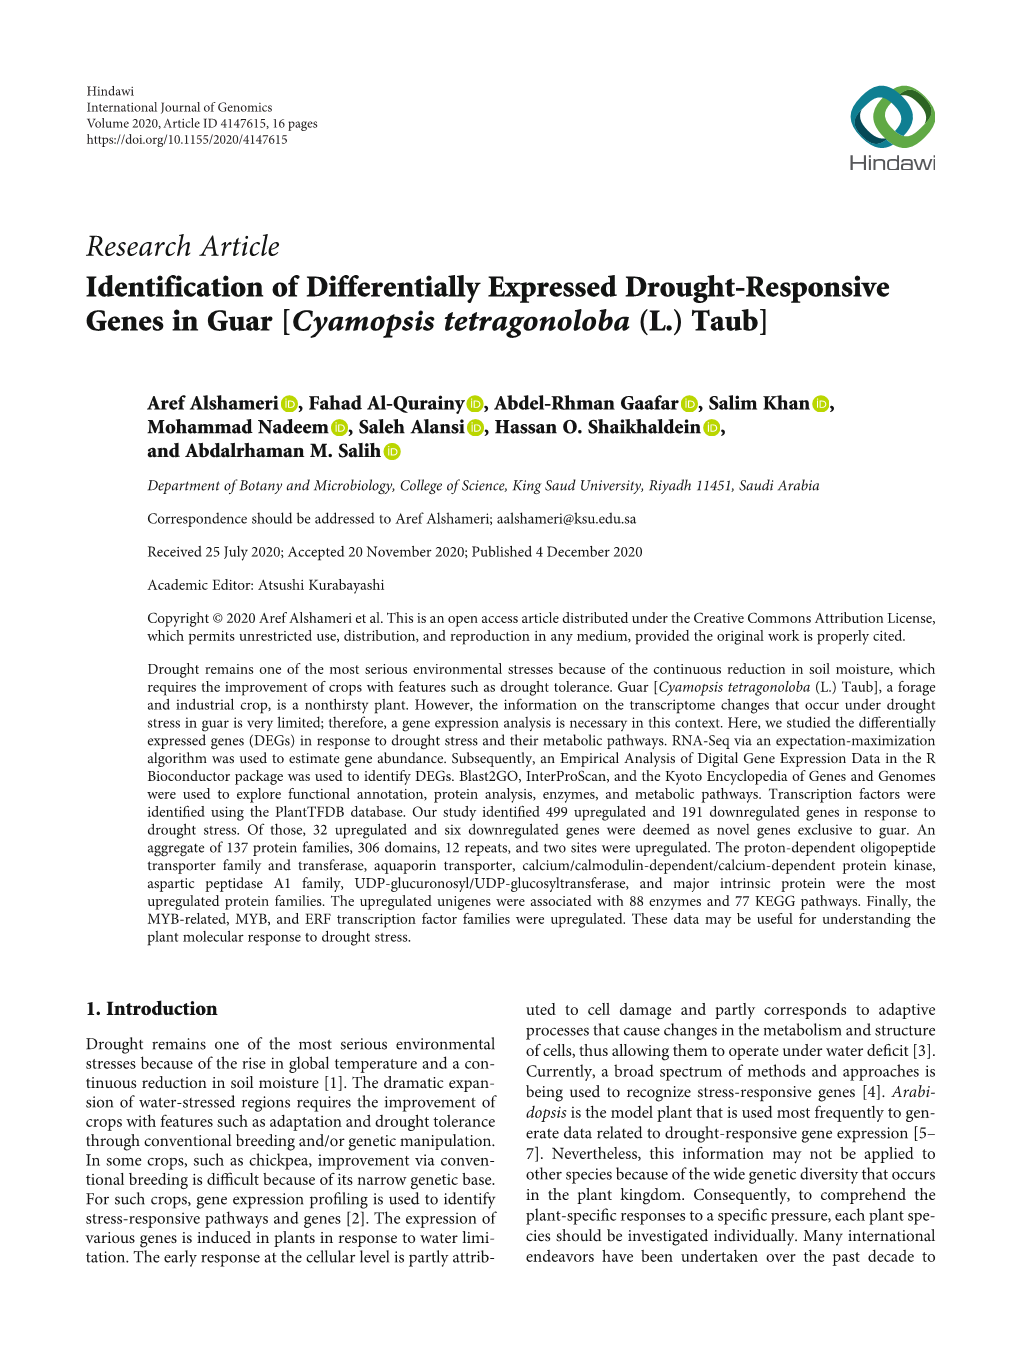 Identification of Differentially Expressed Drought-Responsive Genes in Guar [Cyamopsis Tetragonoloba (L.) Taub]